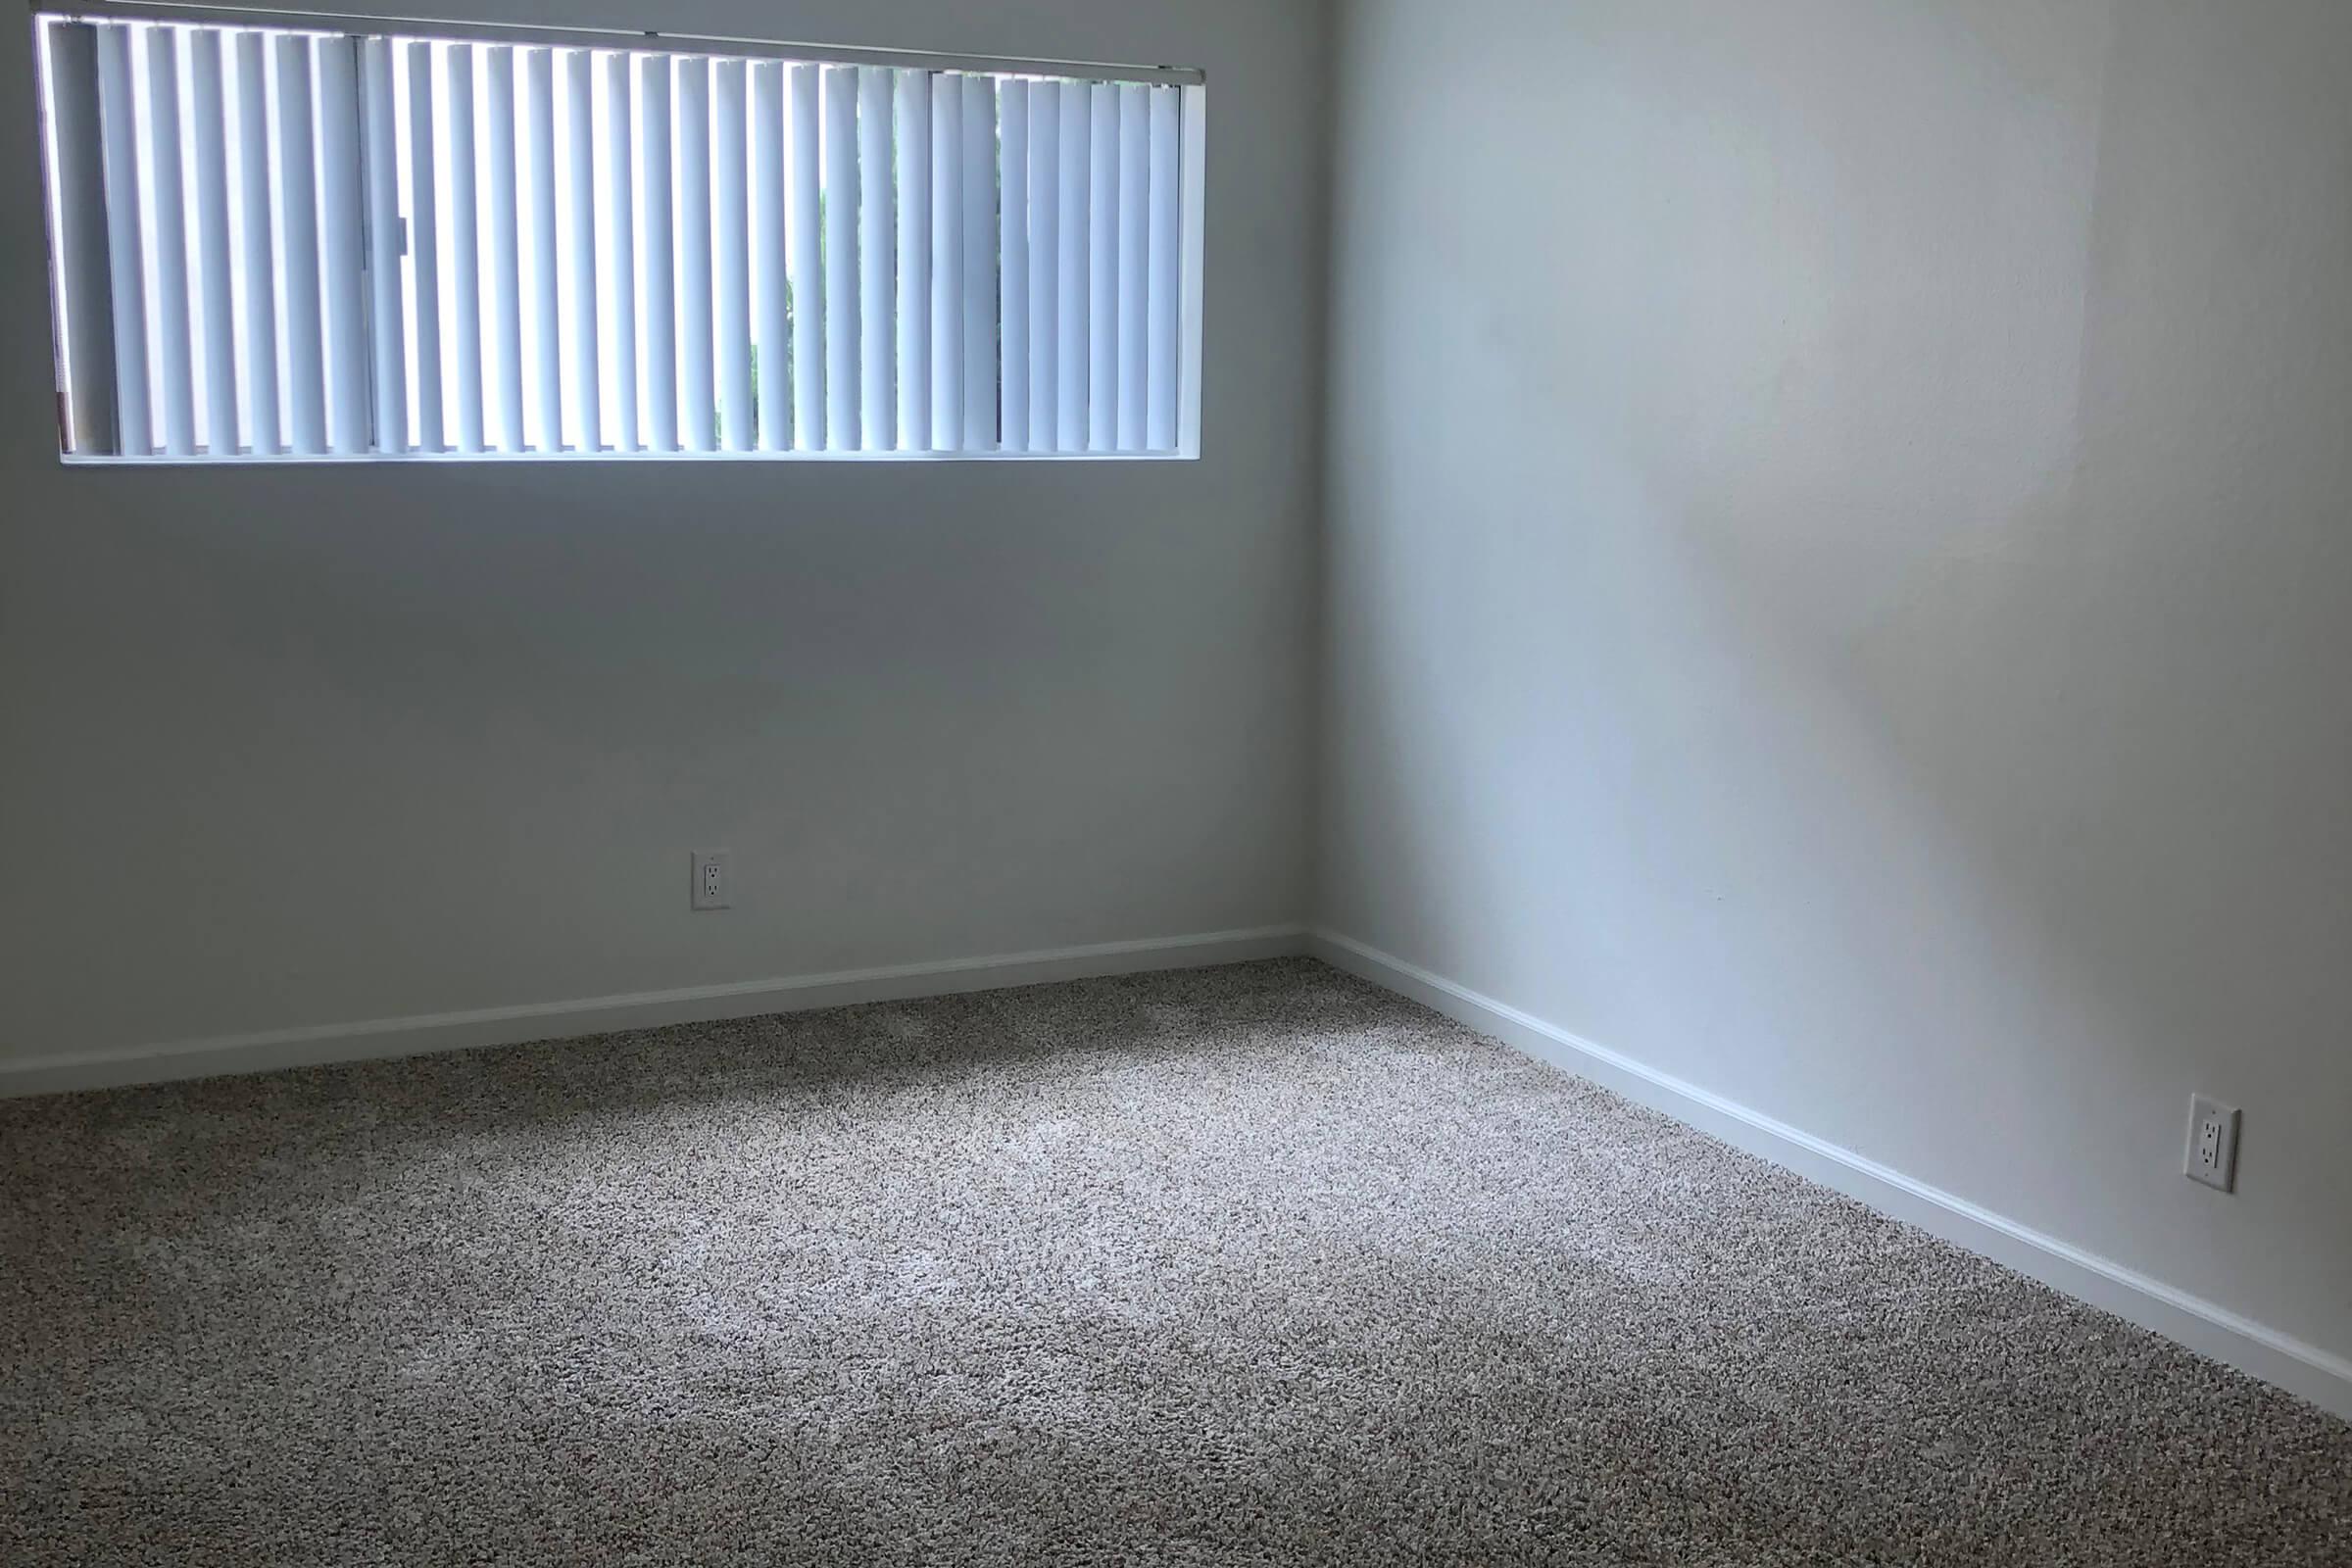 Vacant bedroom with carpeted floors